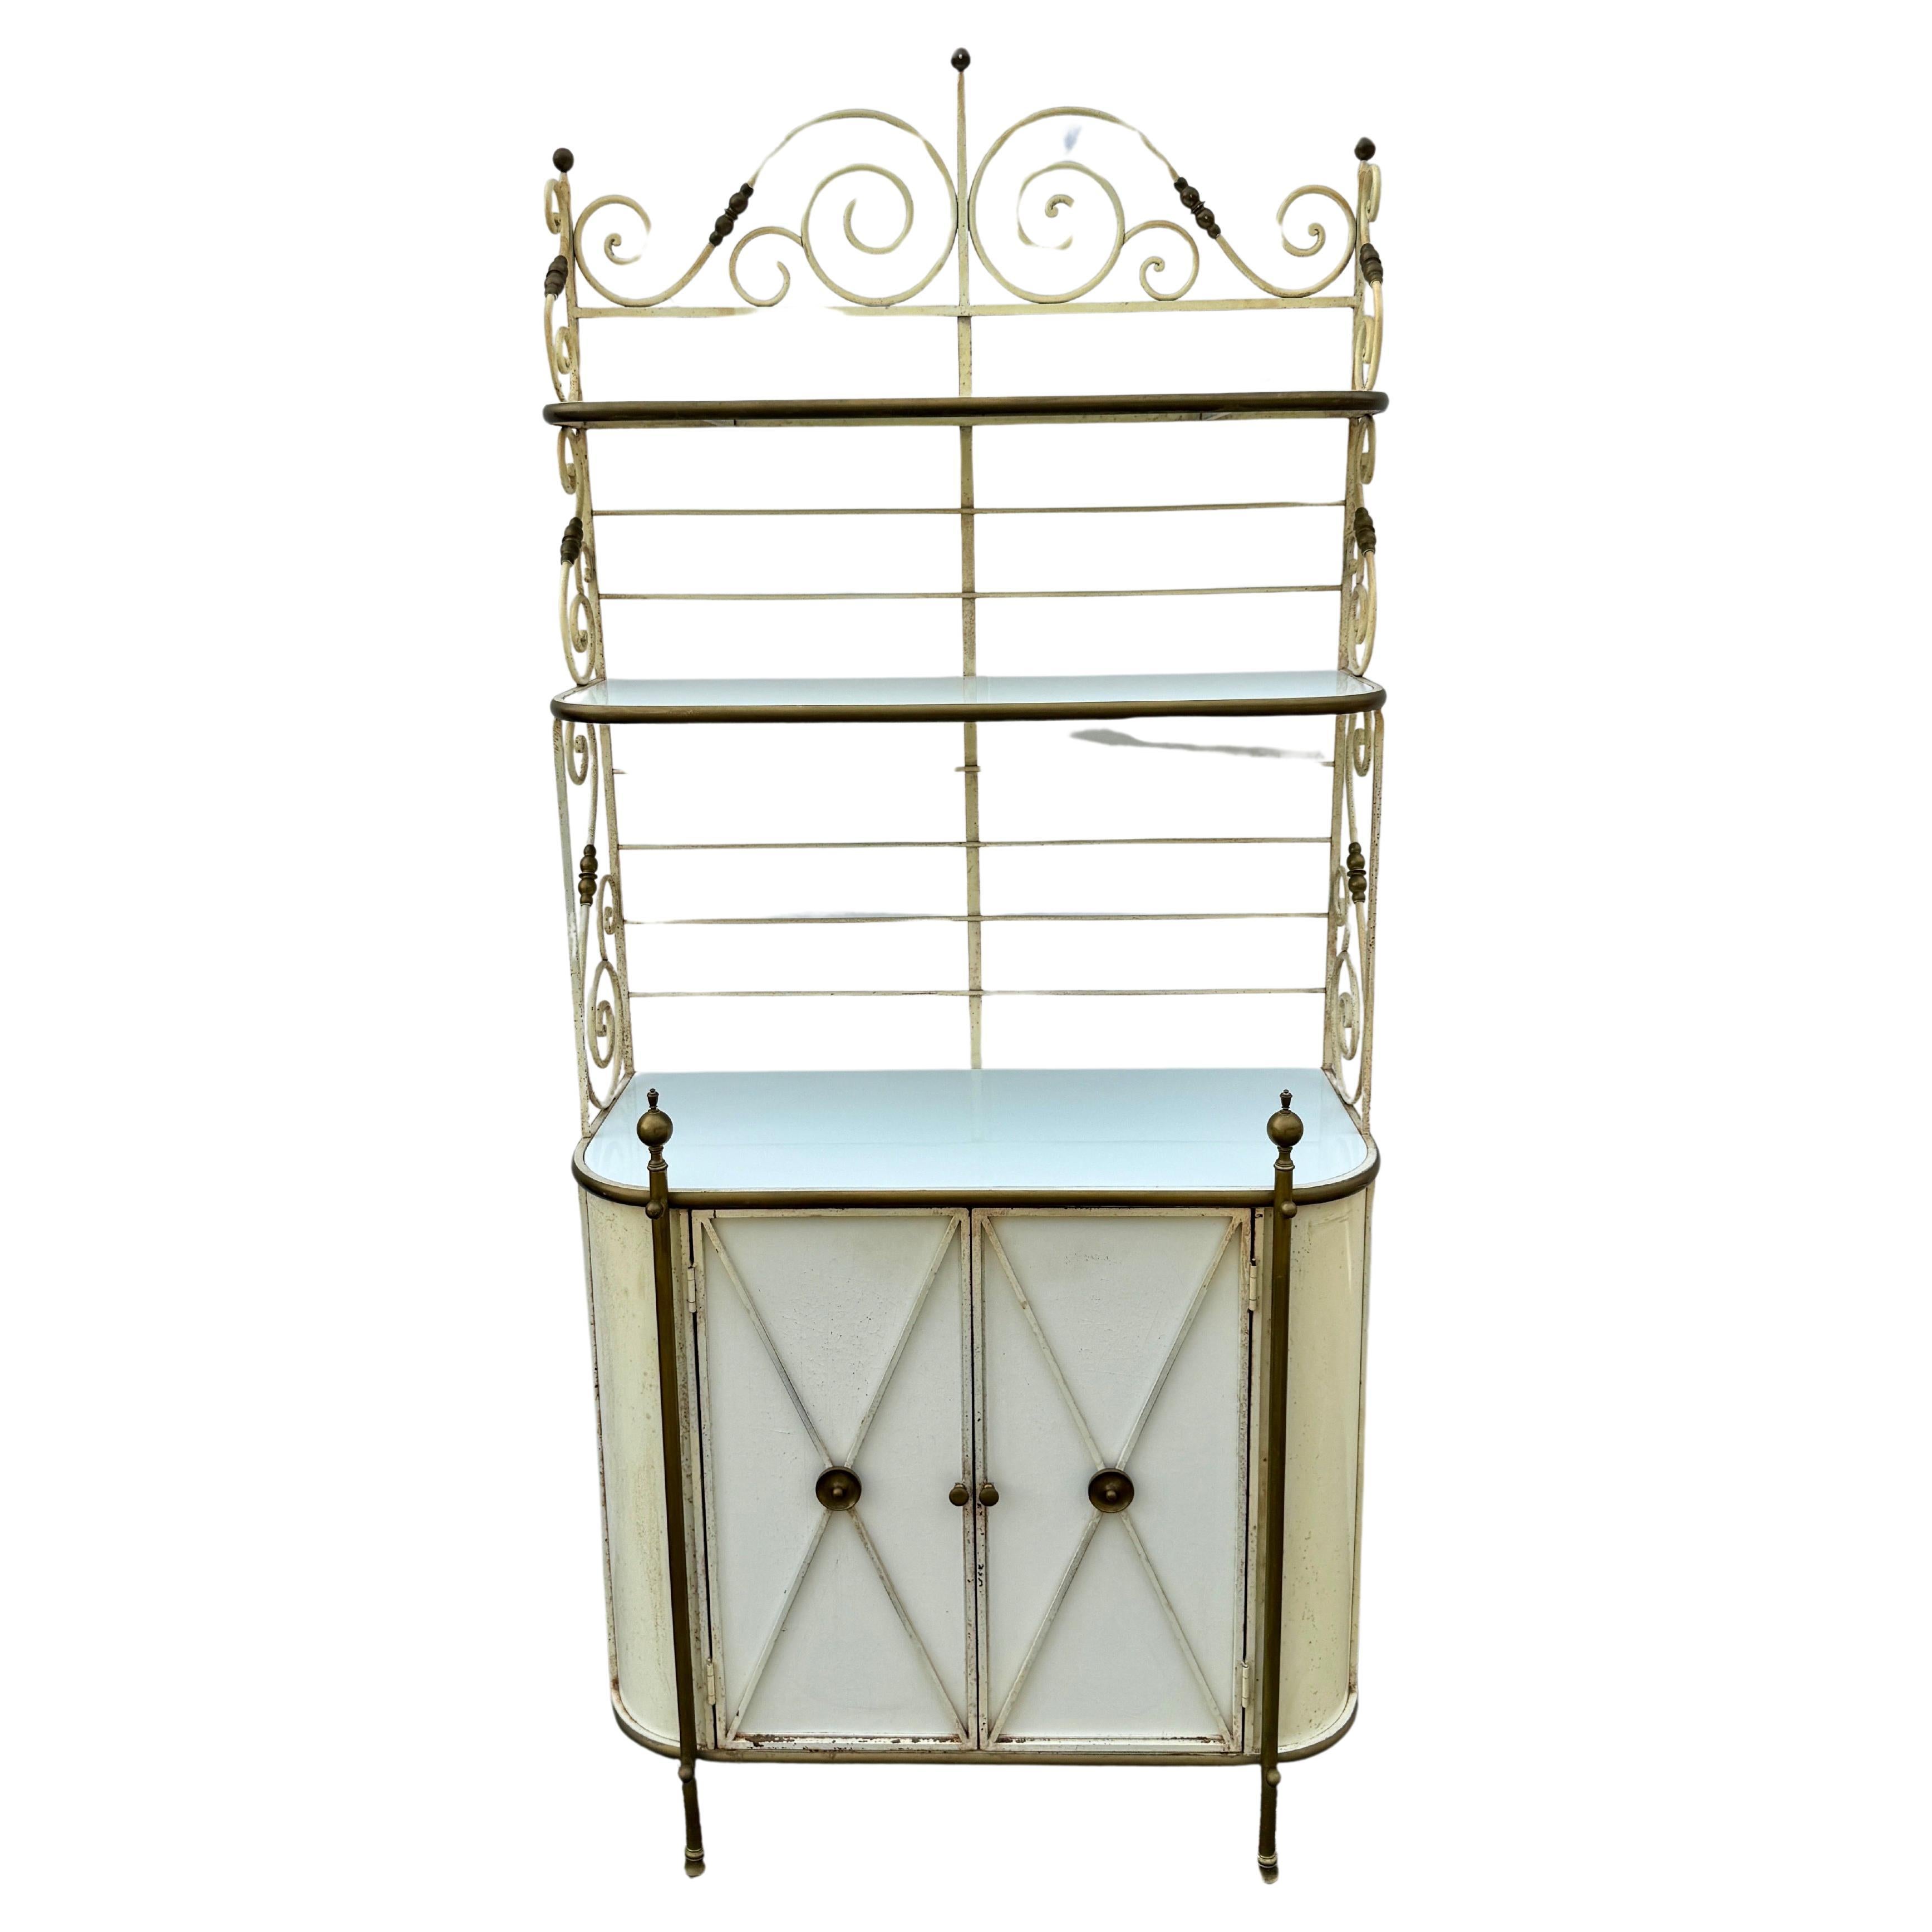 French Iron Brass Bakers Rack Bar Cabinet with Milk Glass Shelves and 

Impressive Iron Vintage French Bakers Rack with White Glass Shelves. Fantastic versatile Mid-Century piece with many uses including storing fresh breads or other food items as